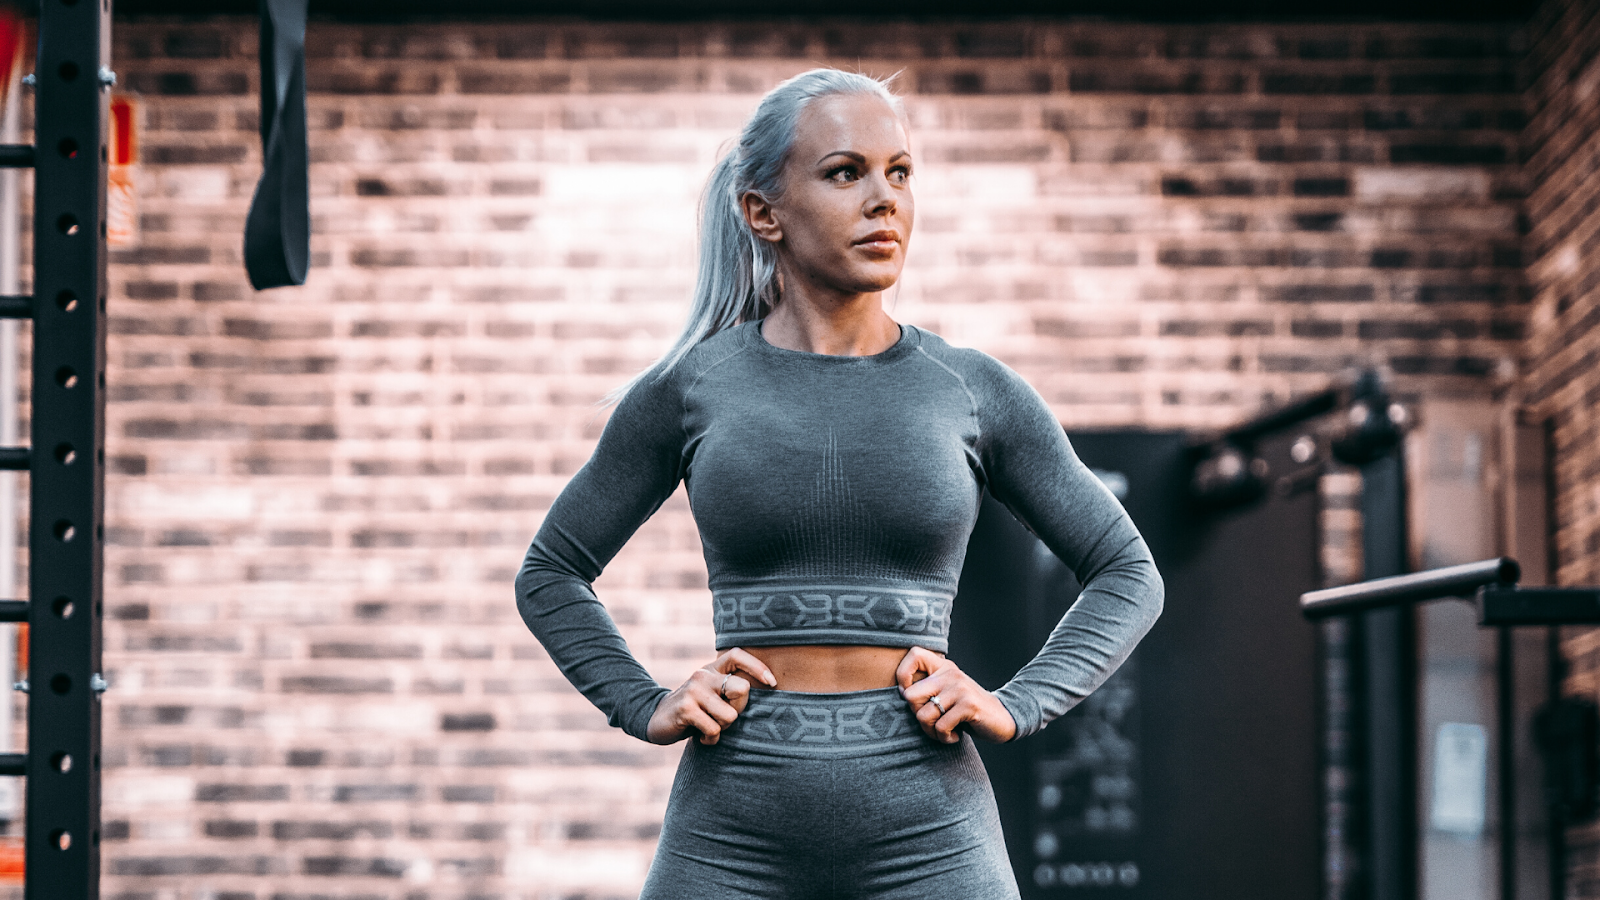 Be queen of the gym with seamless outfits